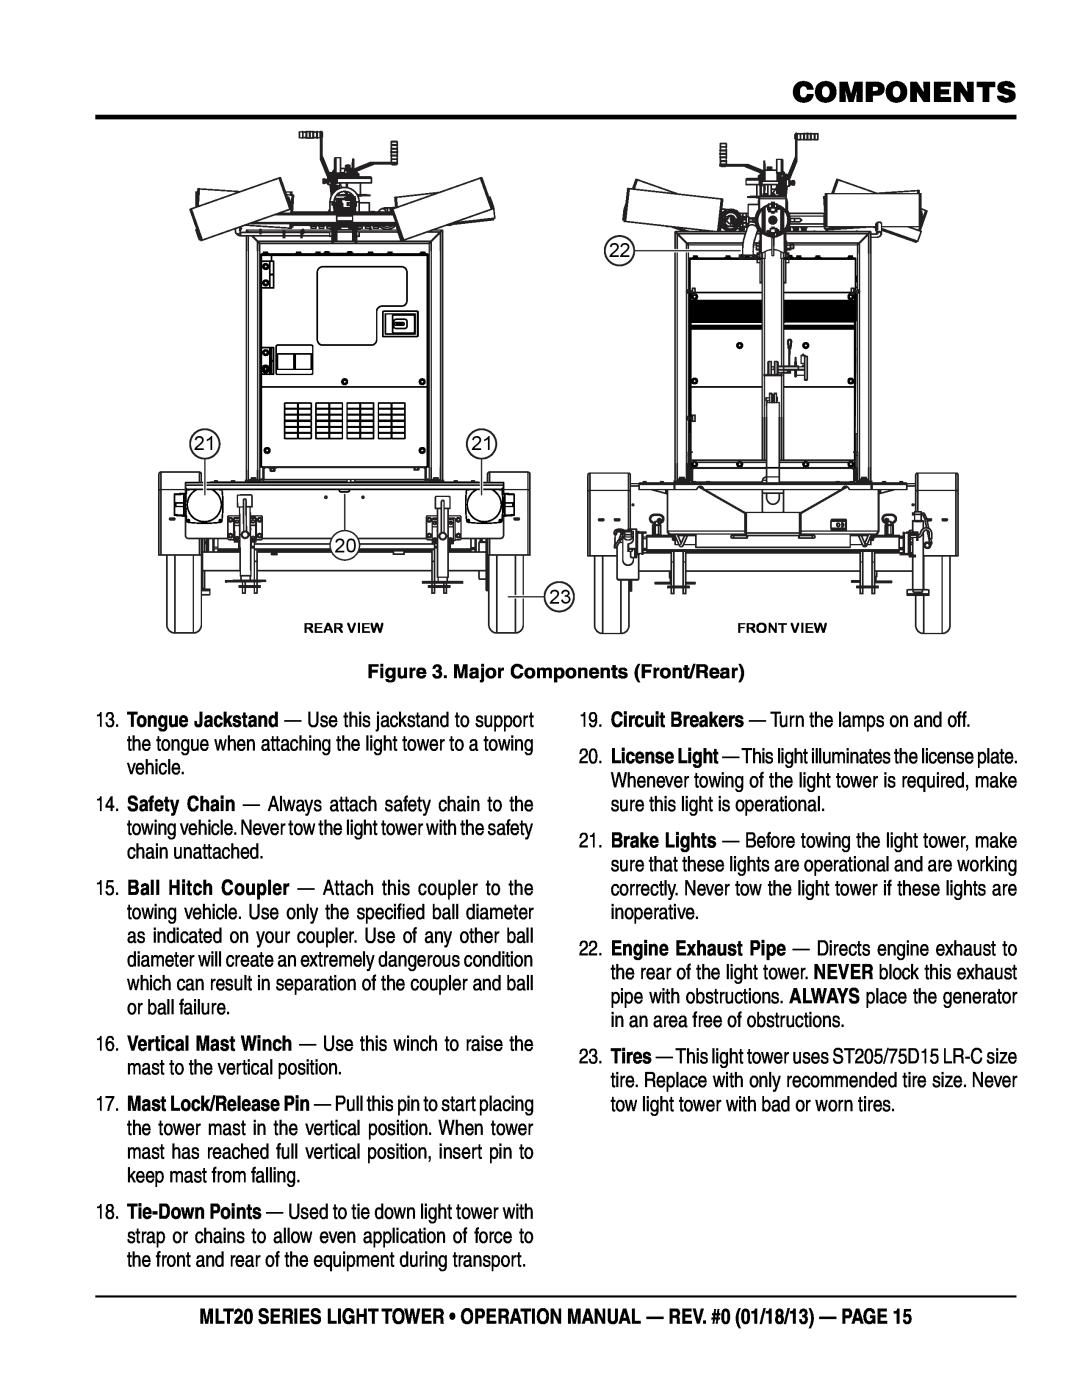 Multi Tech Equipment MLT20DCA6 operation manual components, Circuit Breakers — Turn the lamps on and off 